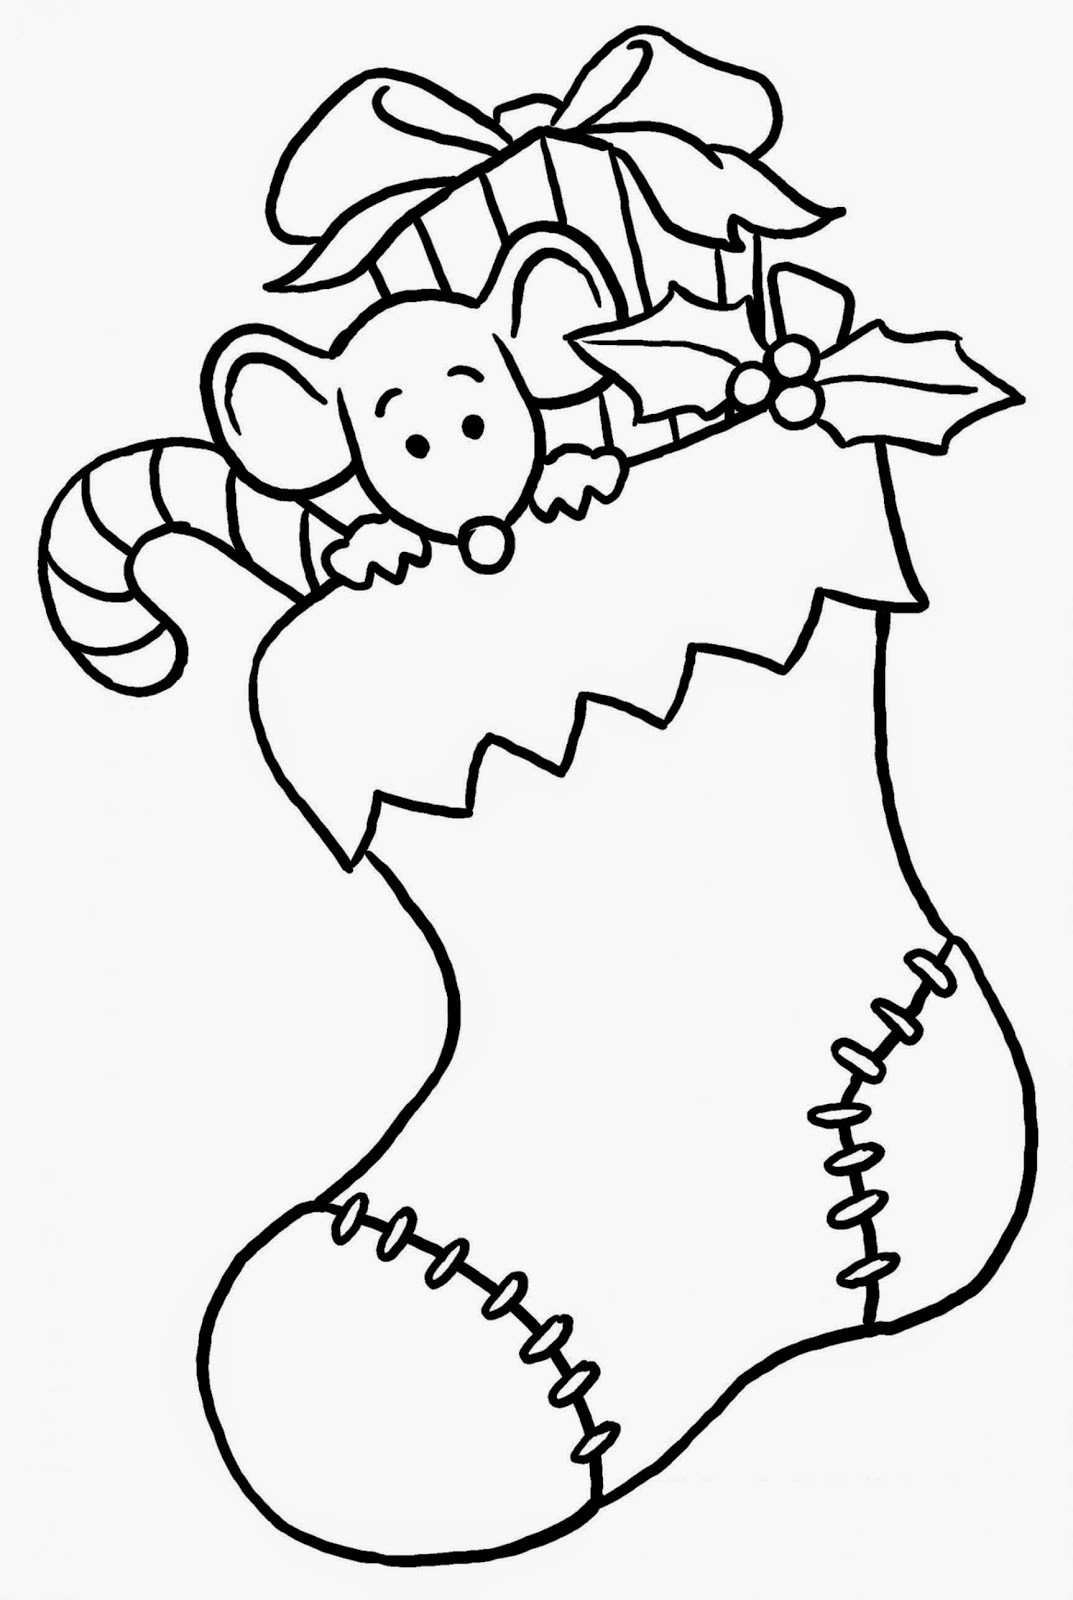 Kindergarten Coloring Pages Printable
 Free Printable Preschool Coloring Pages Best Coloring